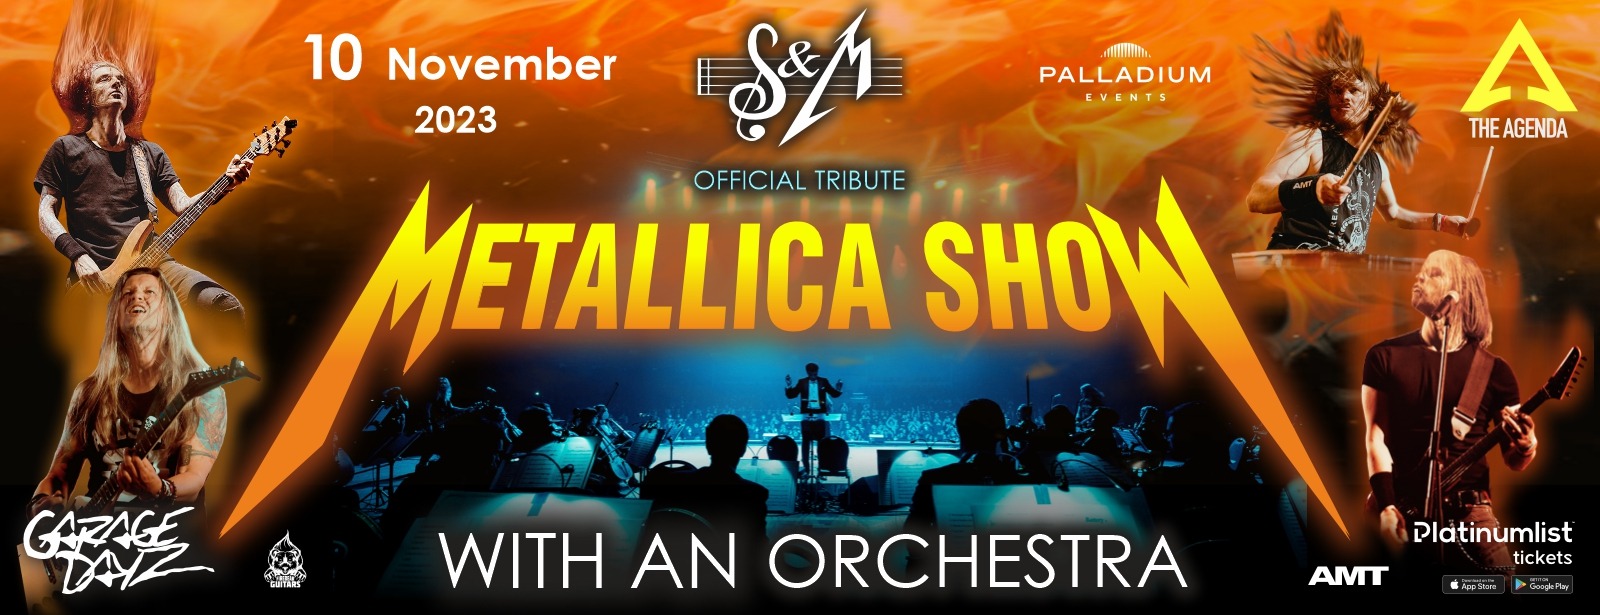 METALLICA SHOW S&M TRIBUTE with a Symphony Orchestra in Dubai - Coming Soon in UAE